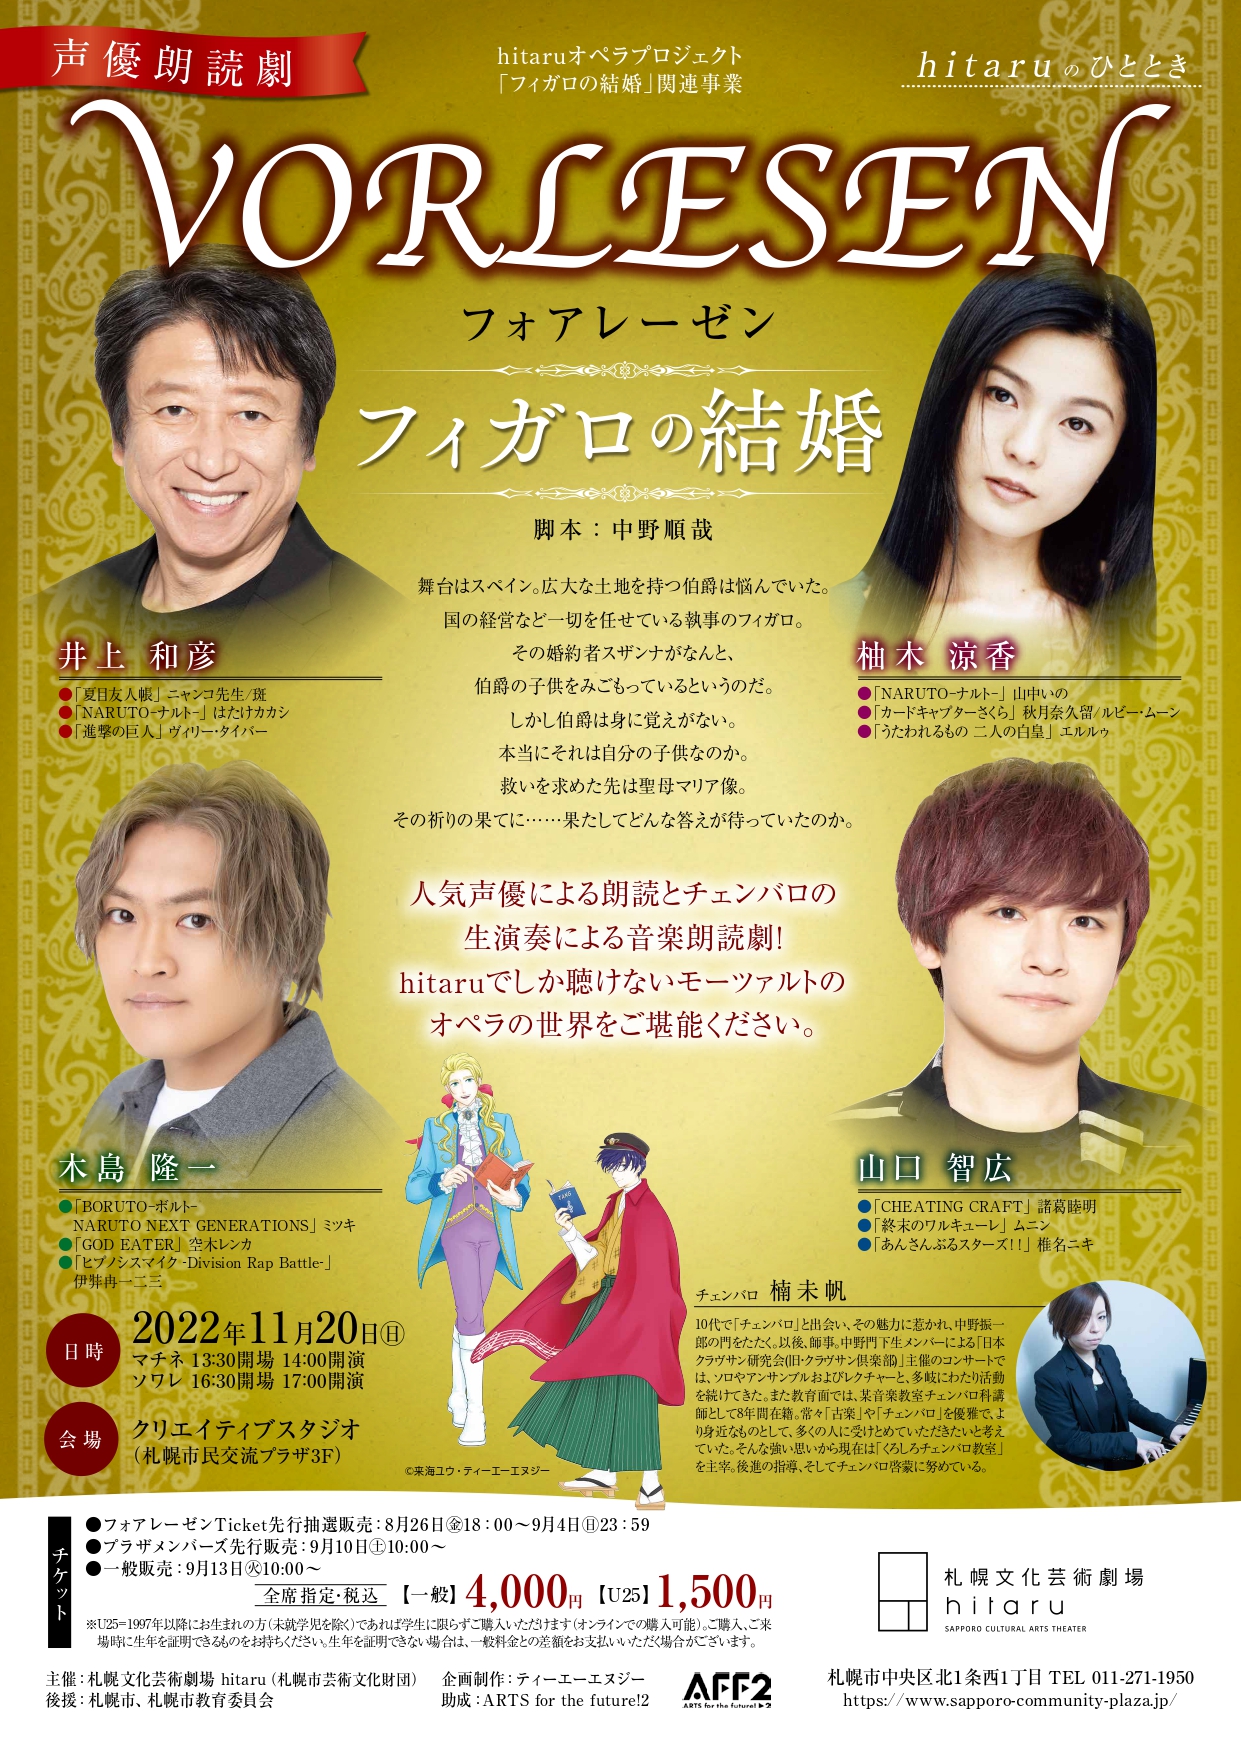 Event related to the hitaru Opera Project “The Marriage of Figaro” Moments at hitaru: A Theatrical Reading of “The Marriage of Figaro” by the Vorlesen Voice Actorsimage